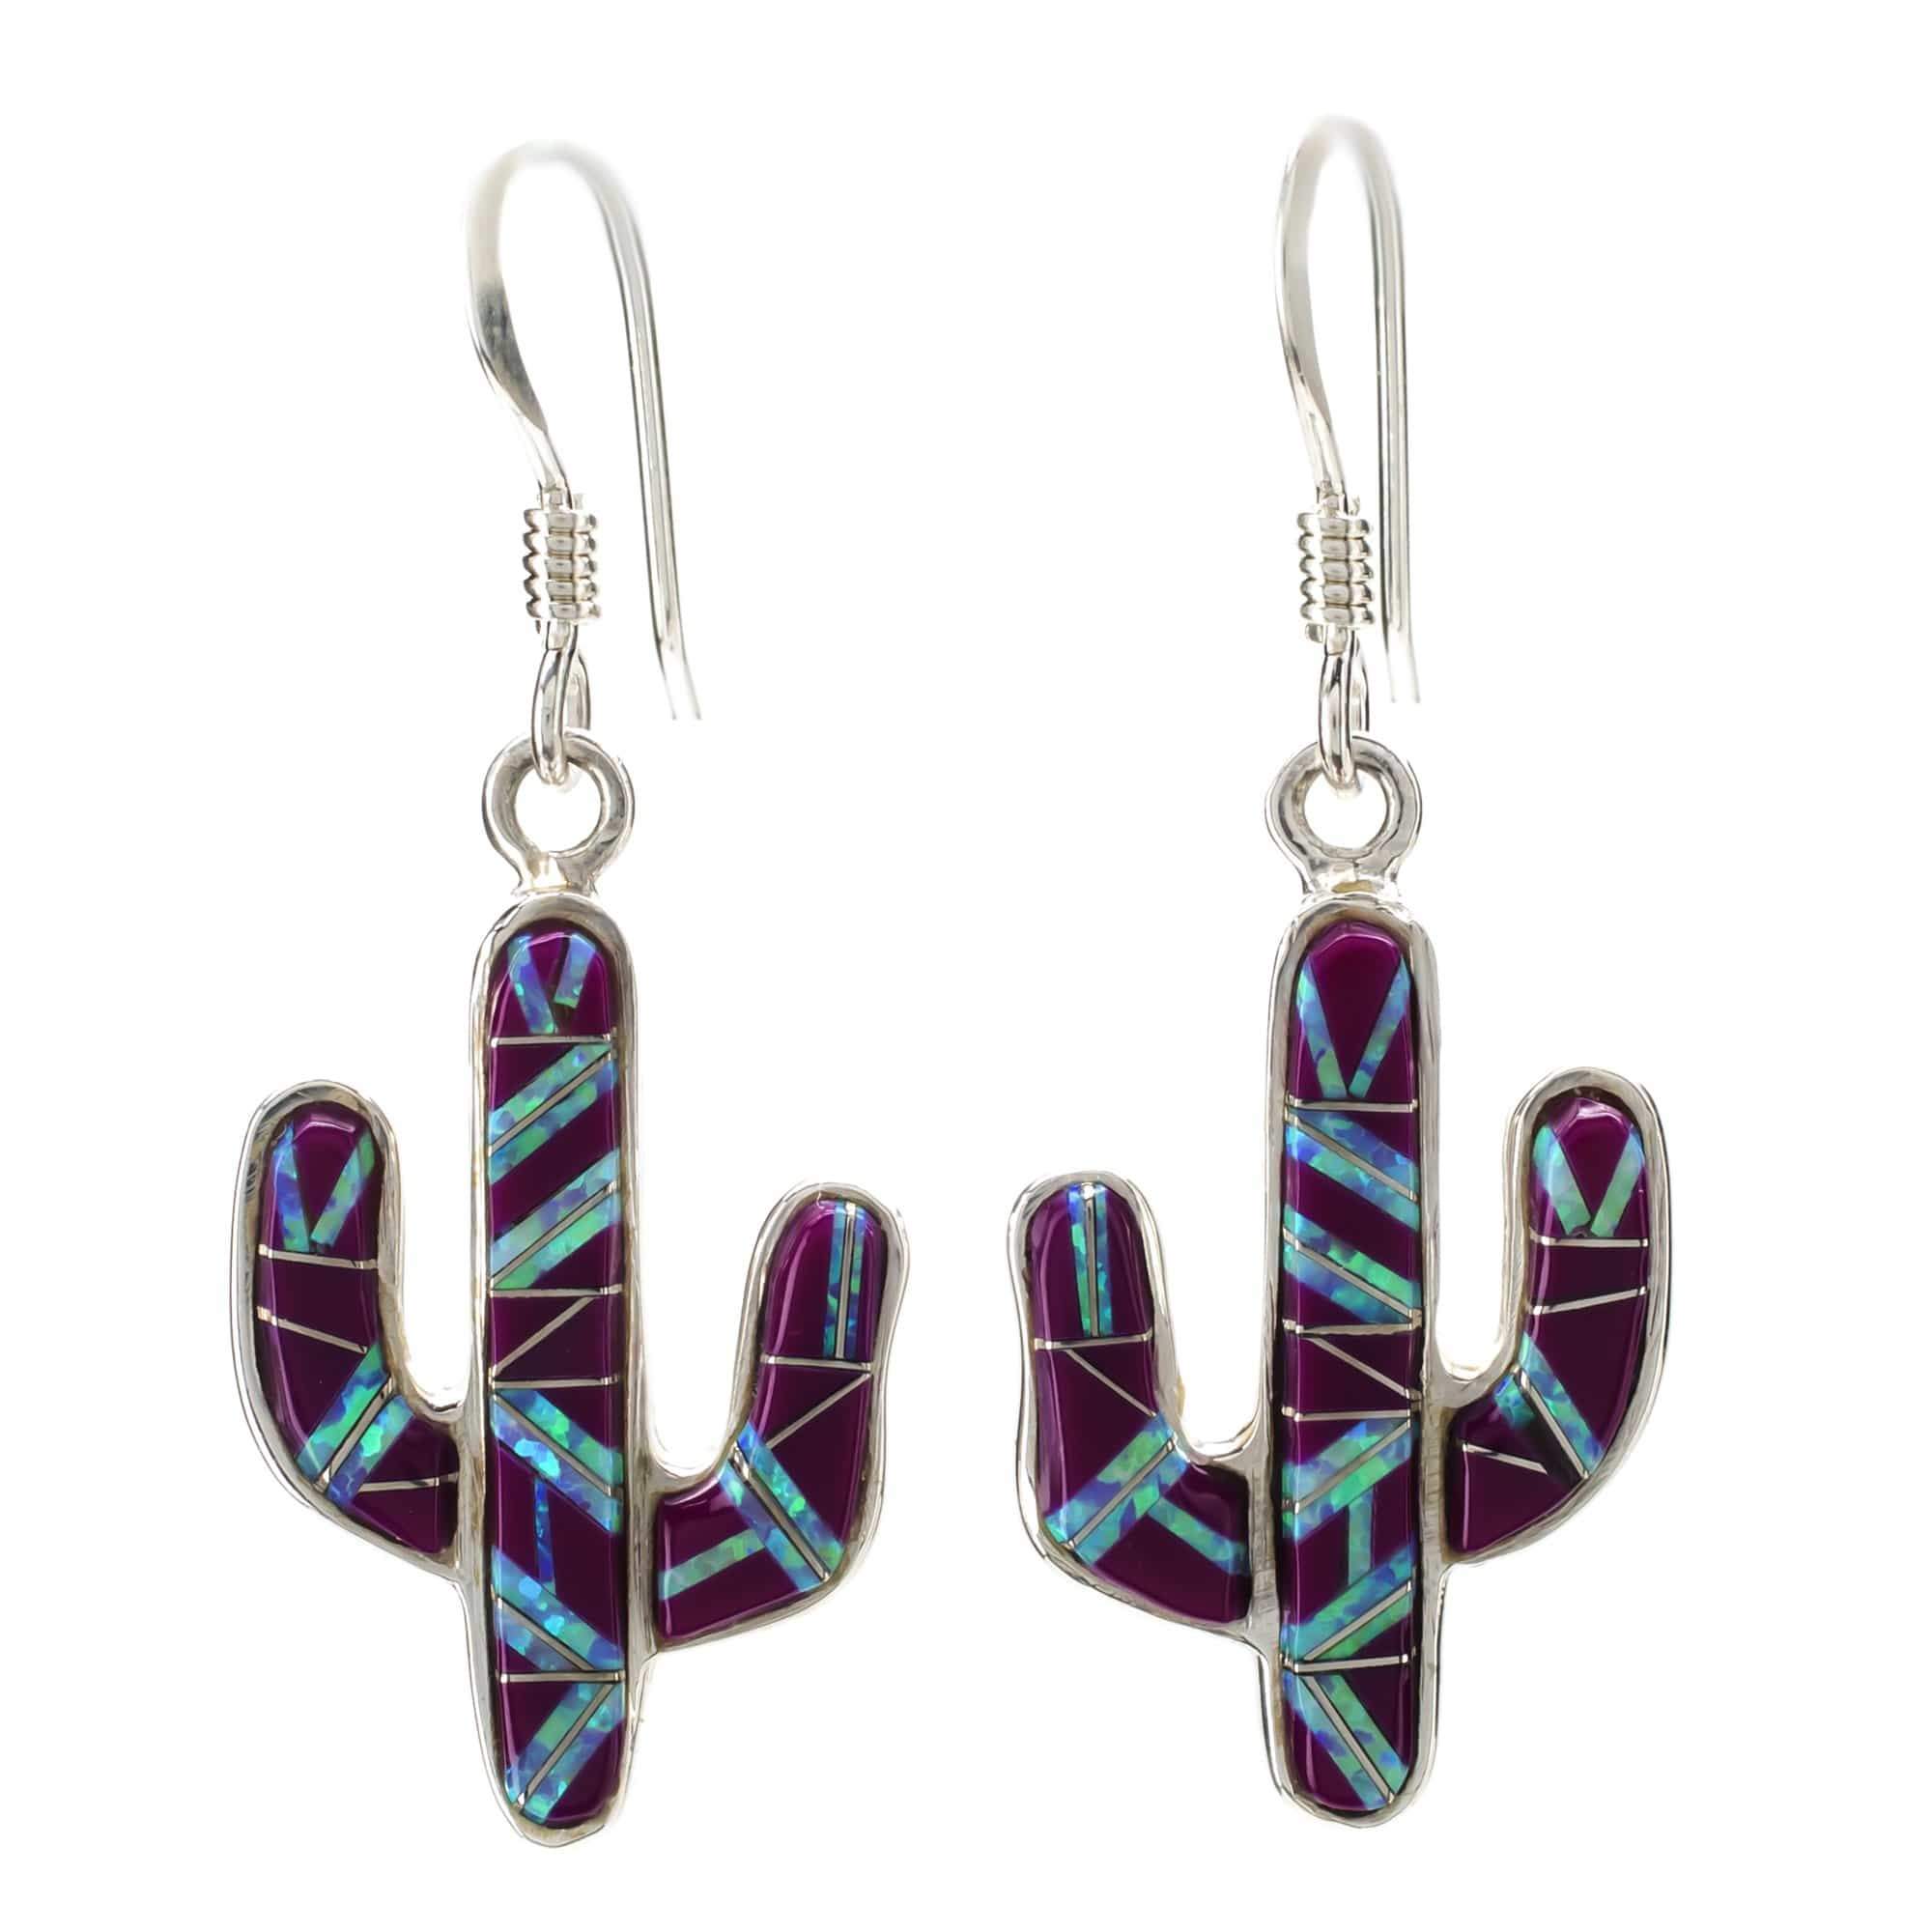 Kalifano Native American Jewelry Sugilite Cactus 925 Sterling Silver Earring with French Hook USA USA Handmade with Opal Accent NME.0602.SG